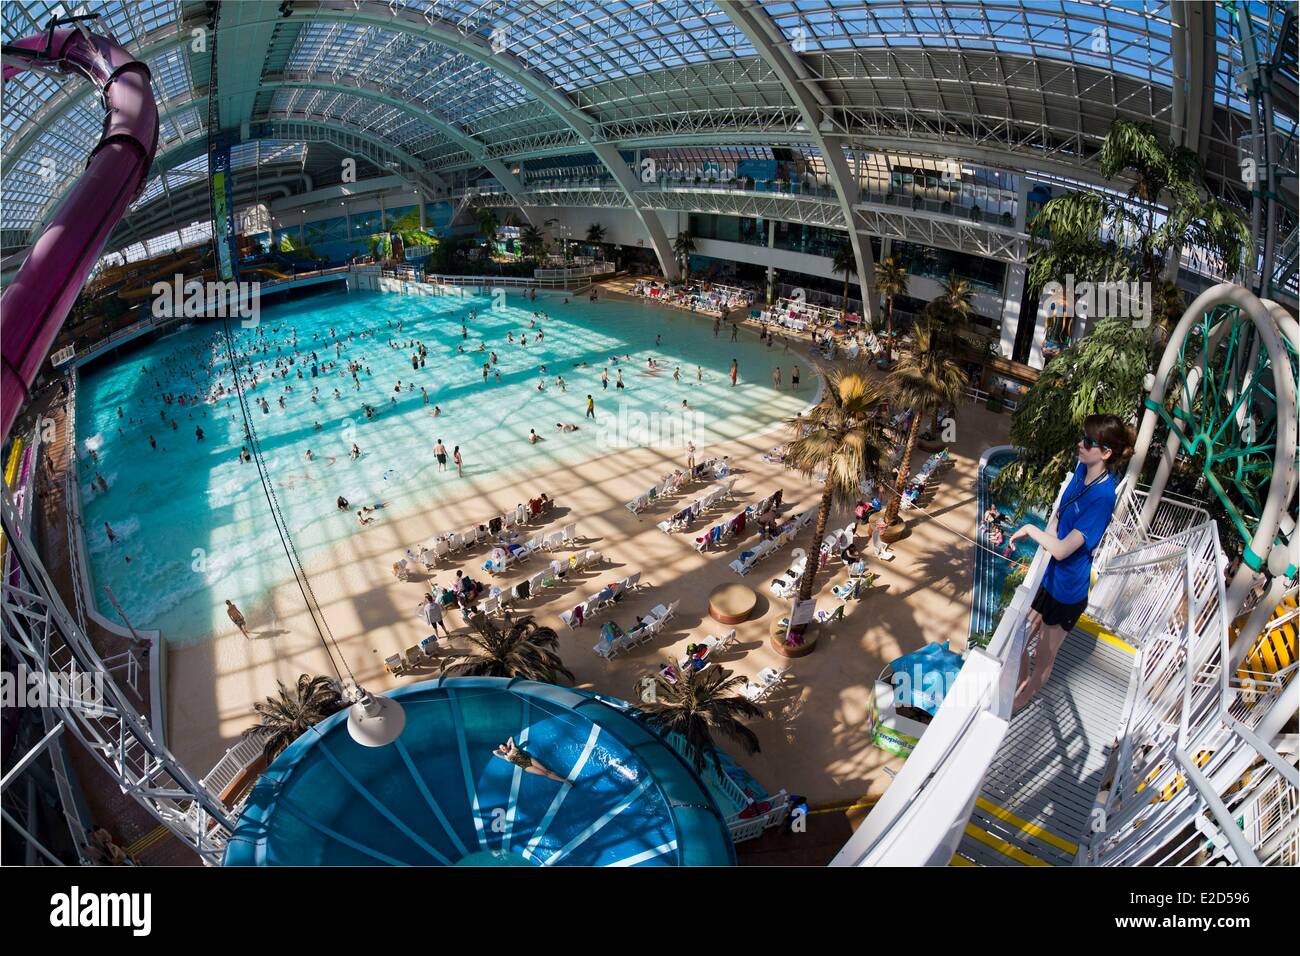 Canada Alberta Edmonton West Edmonton Mall The Largest Shopping Mall In Canada World Waterpark Largest Indoor Waterpark In The Stock Photo Alamy